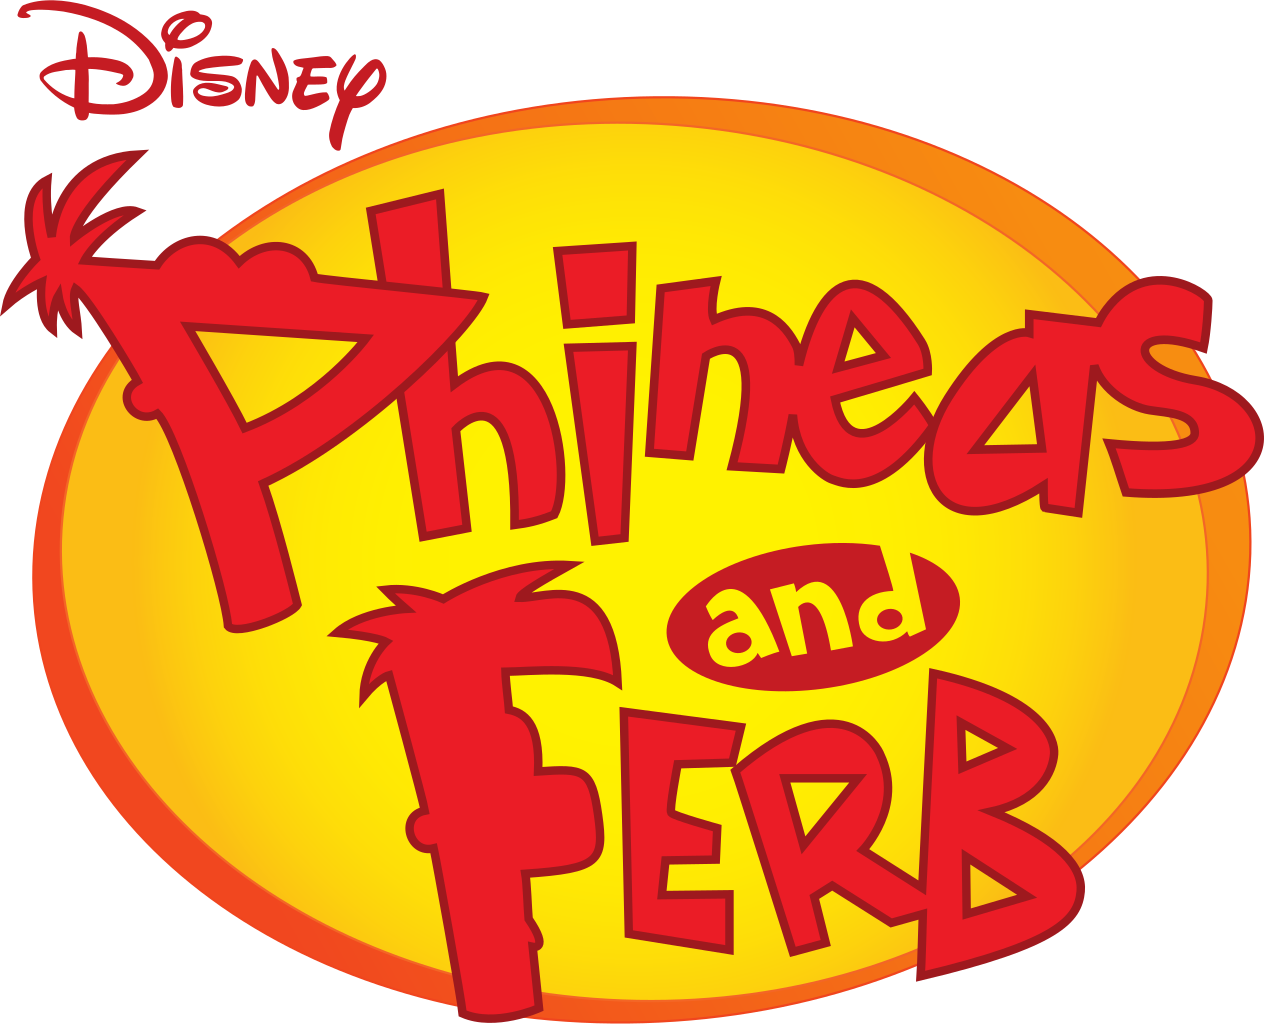 1264px-Phineas_and_Ferb_logo.svg.png